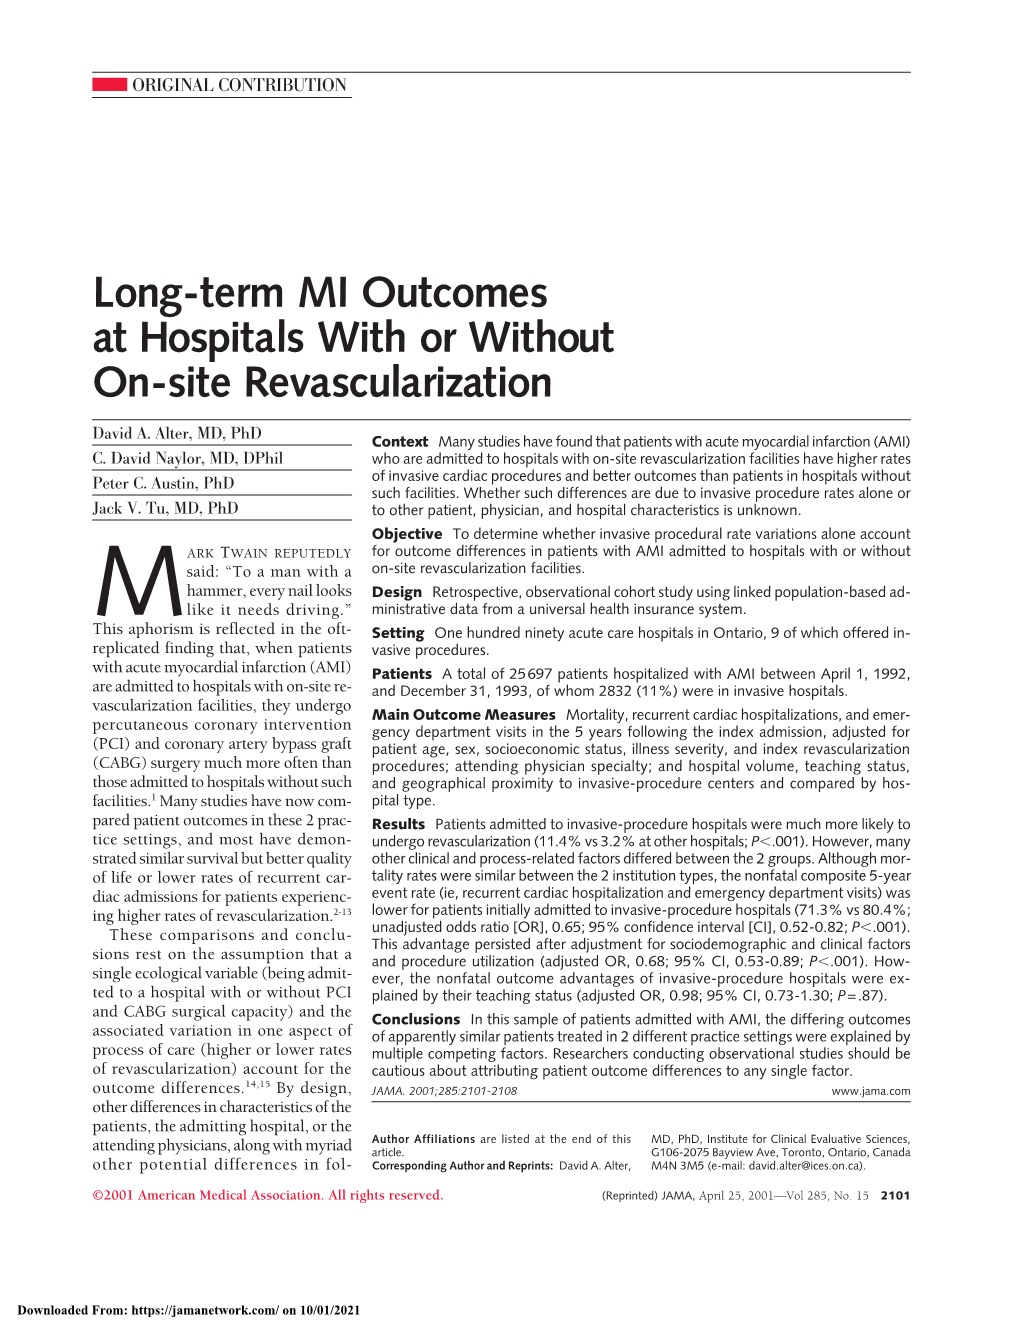 Long-Term MI Outcomes at Hospitals with Or Without On-Site Revascularization